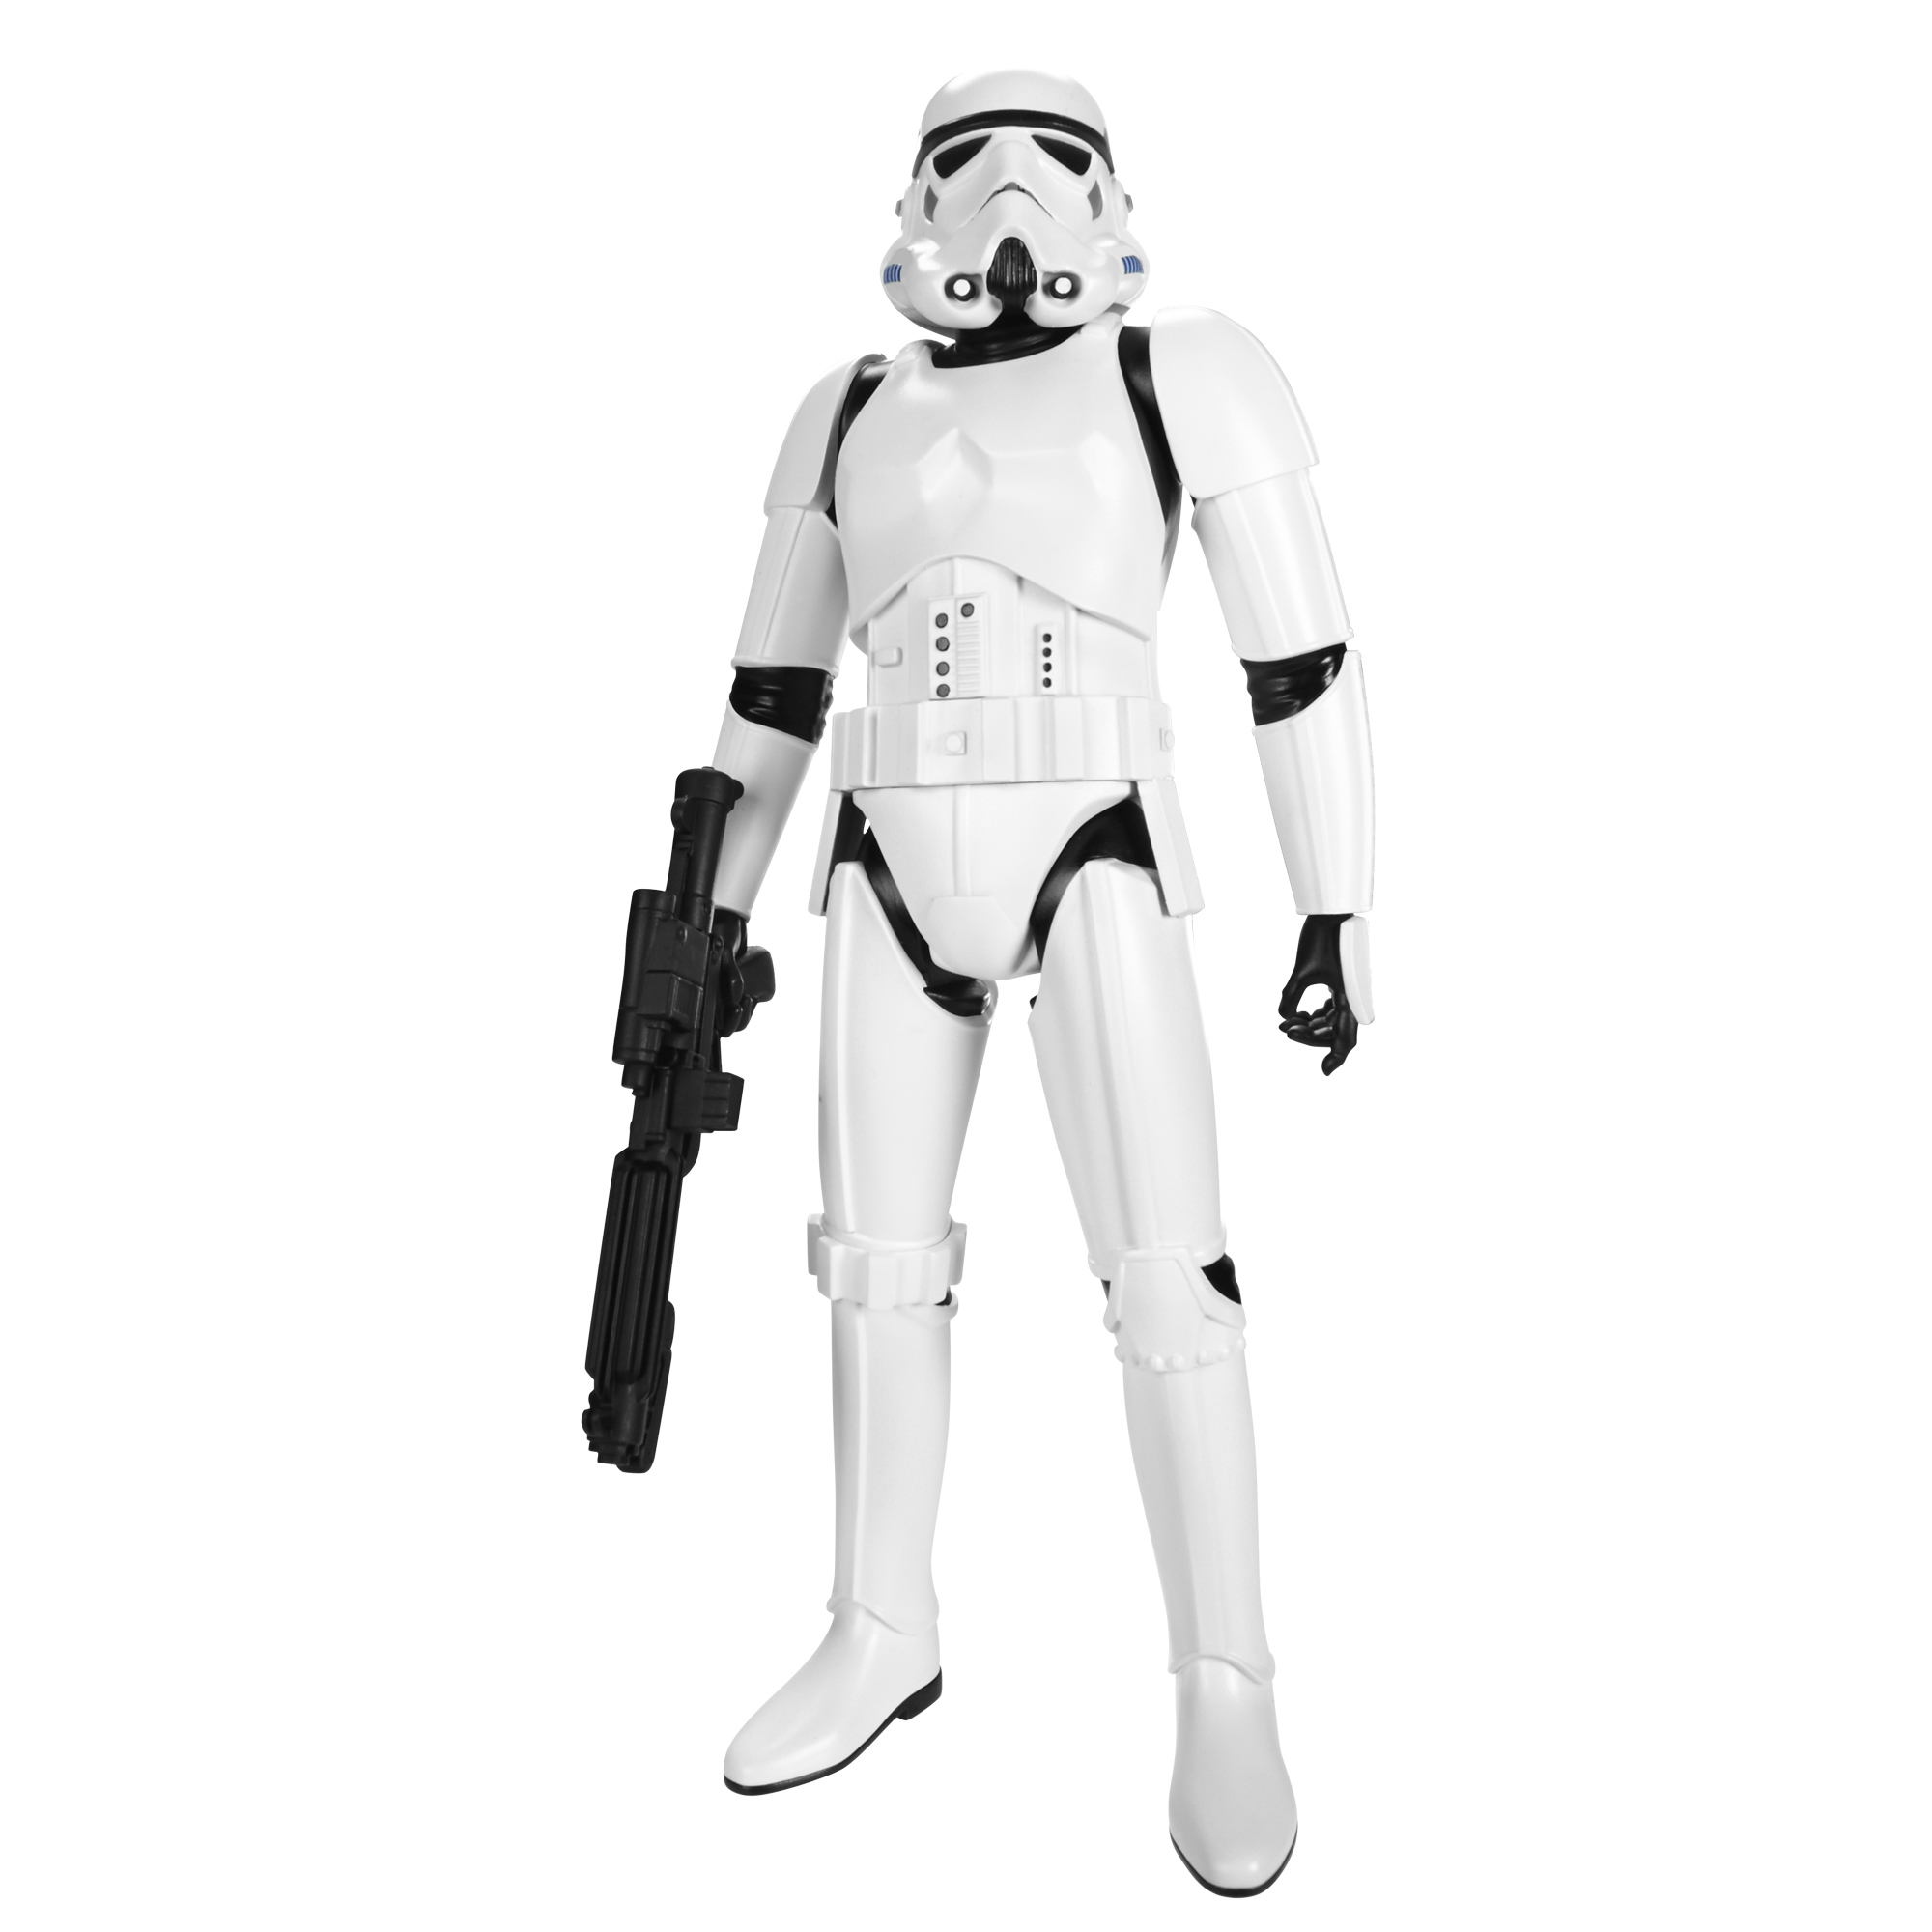 PHOTO: A "Rogue One: A Star Wars Story" stormtrooper action figure from Jakks Pacific is seen here.